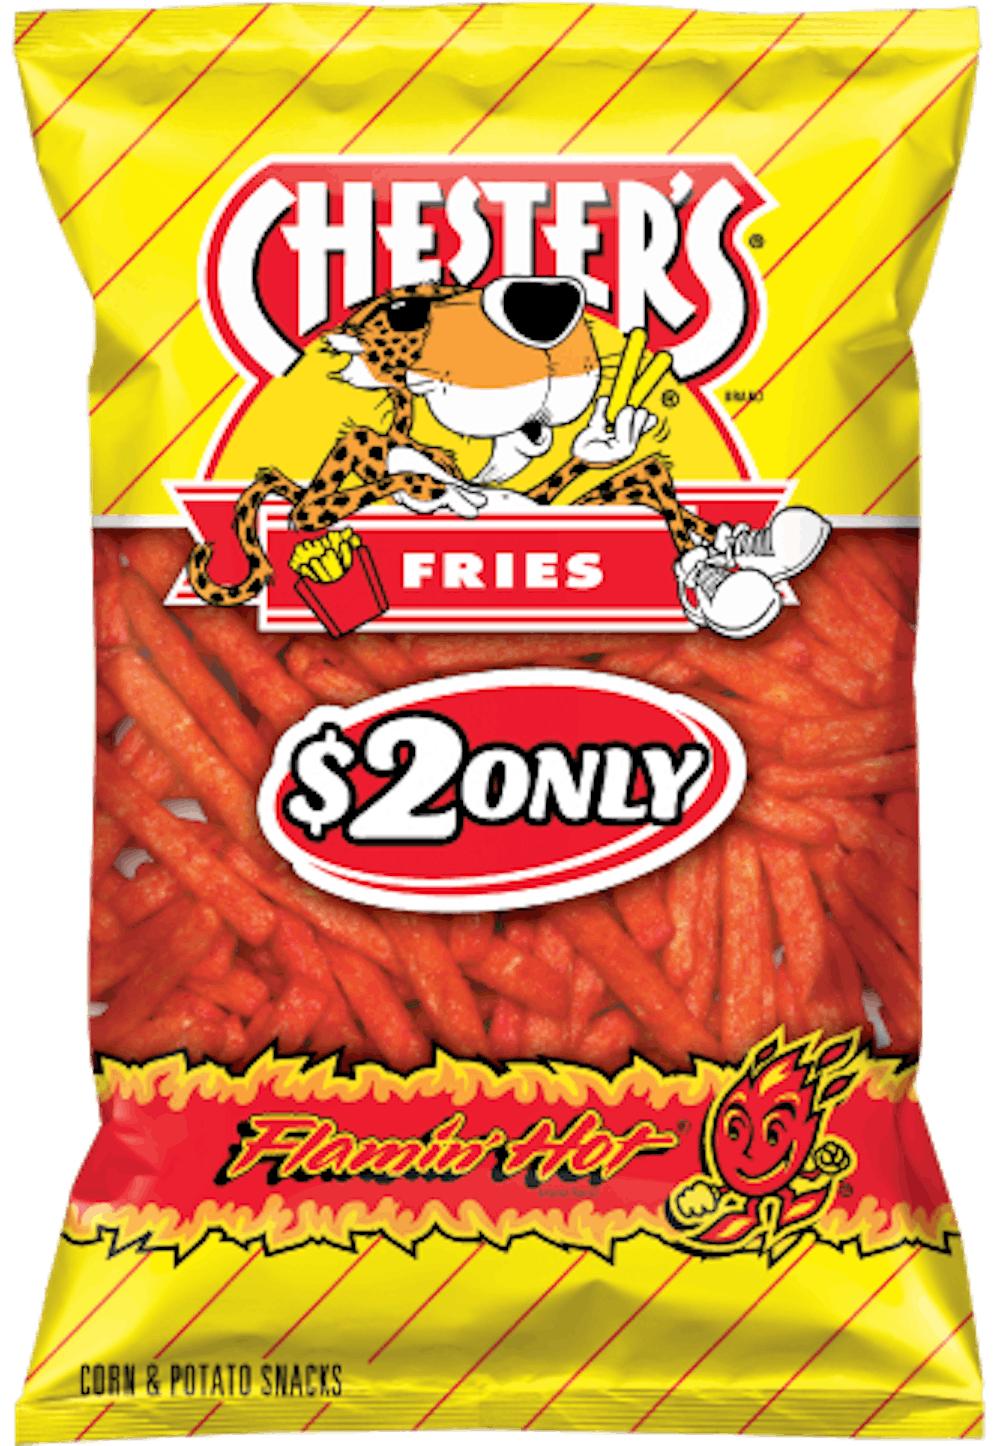 <p>In this week's edition of the Picks column, assistant sports editor Dylan Dixon makes the argument that you should order Chester's Hot Fries from 352delivery.com.&nbsp;</p>